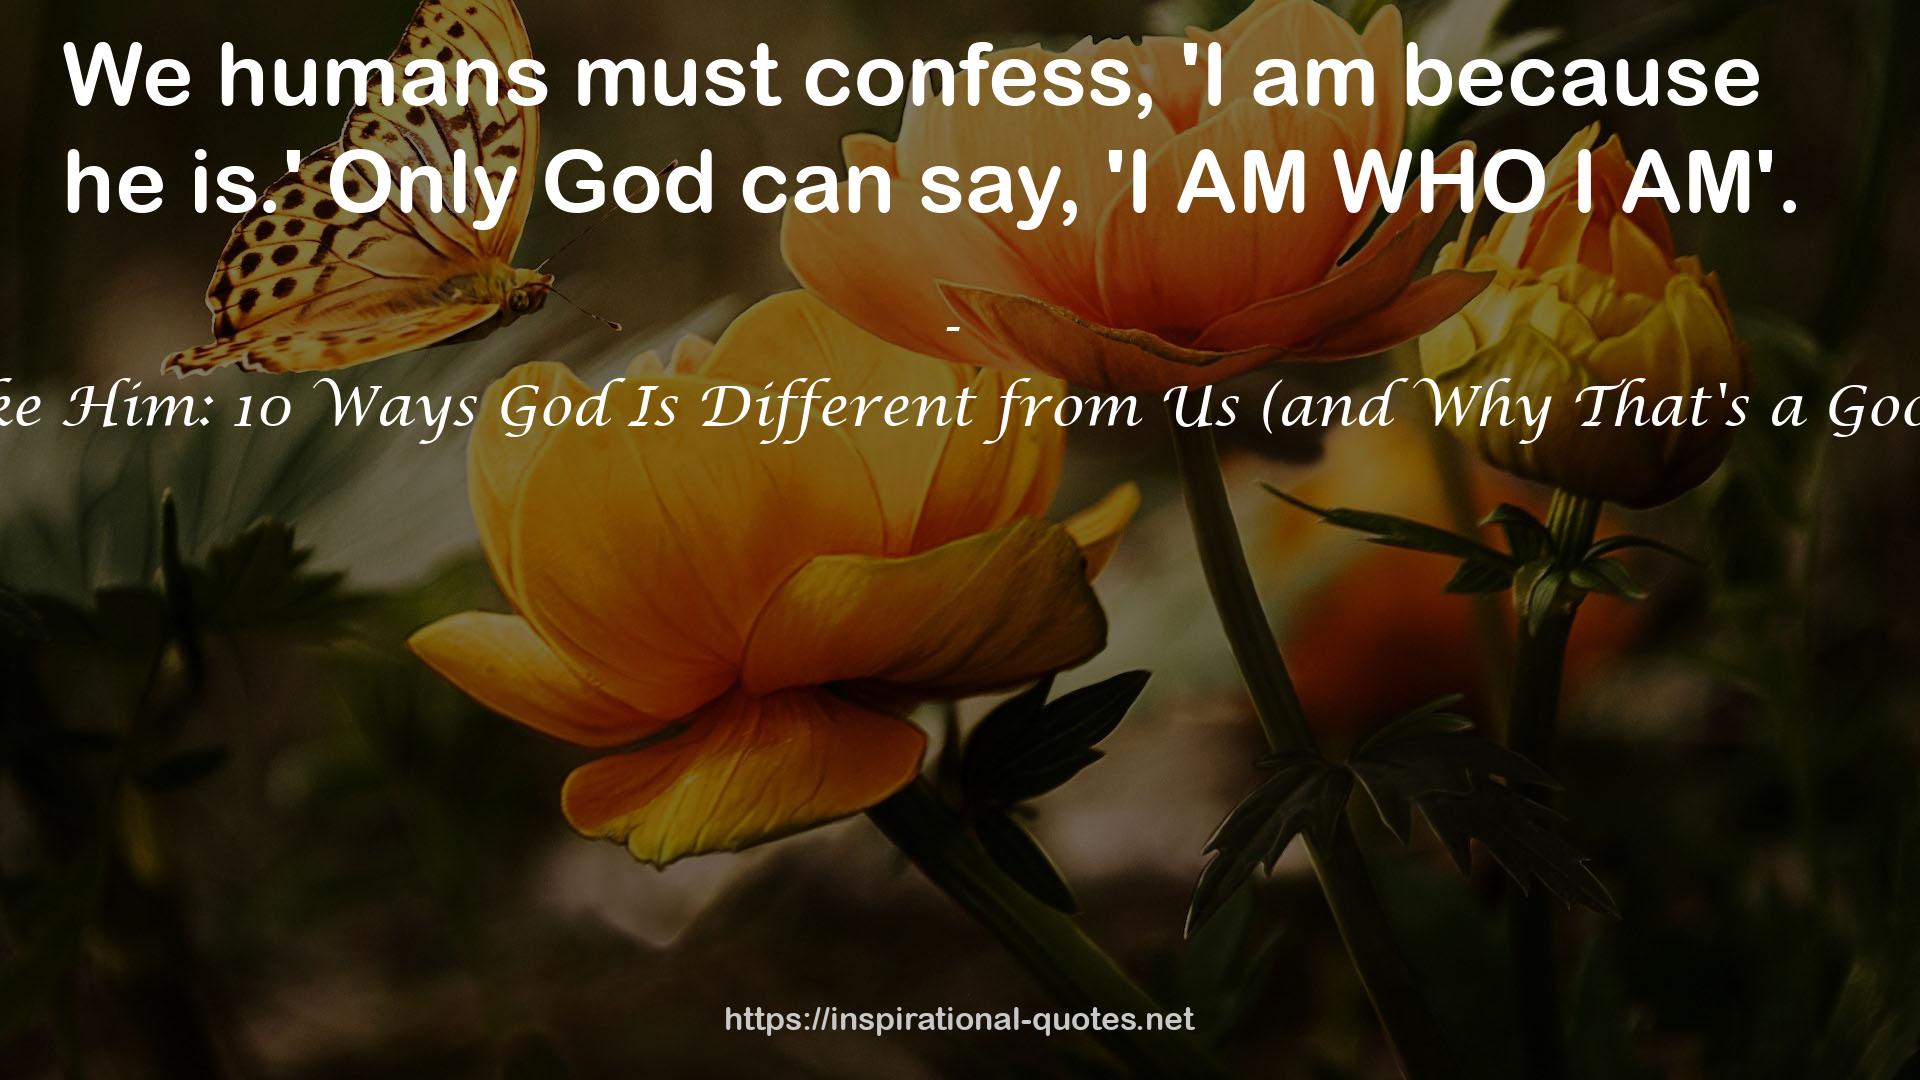 None Like Him: 10 Ways God Is Different from Us (and Why That's a Good Thing) QUOTES